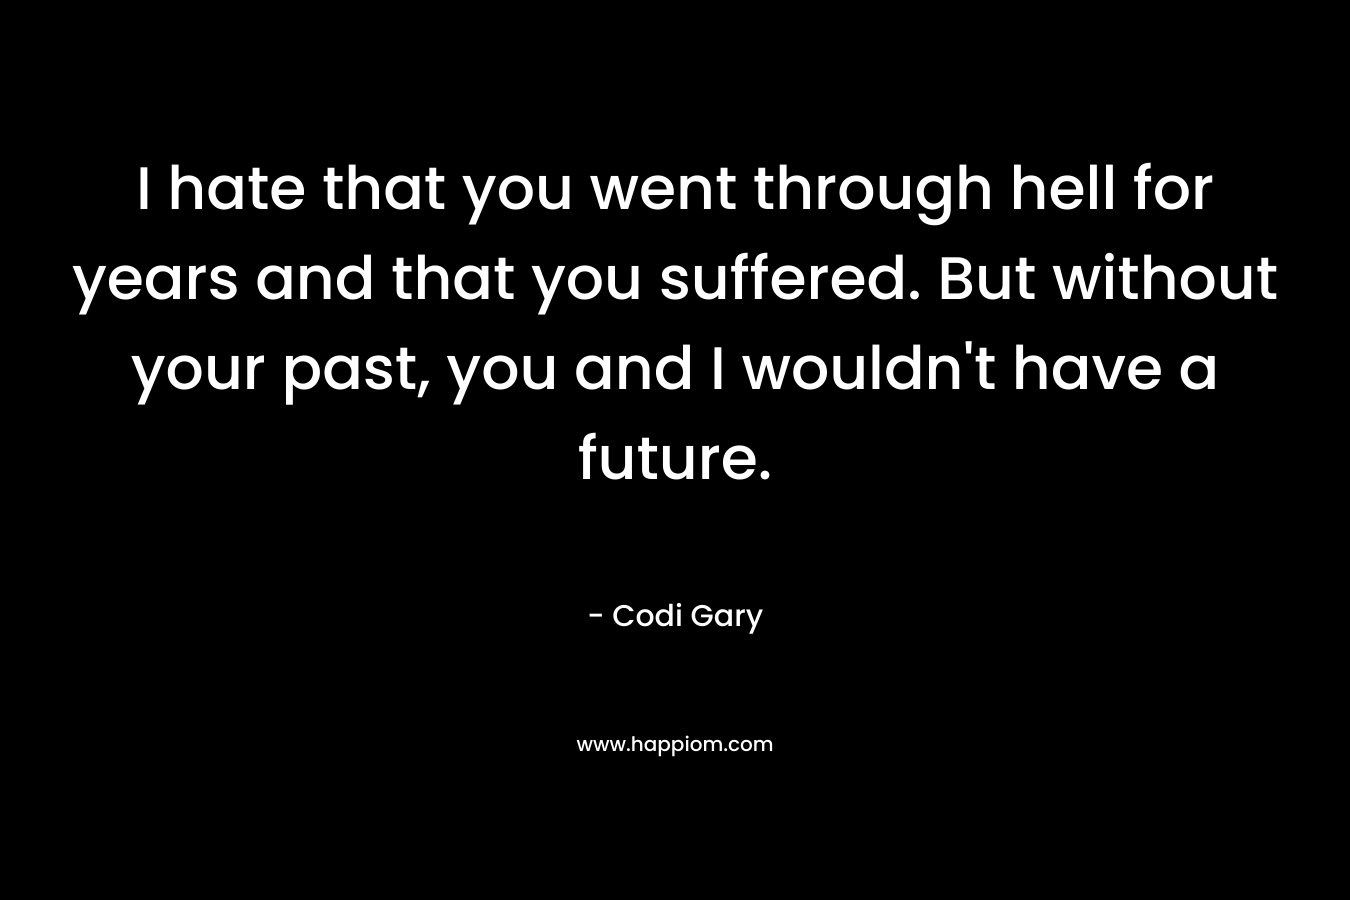 I hate that you went through hell for years and that you suffered. But without your past, you and I wouldn’t have a future. – Codi Gary